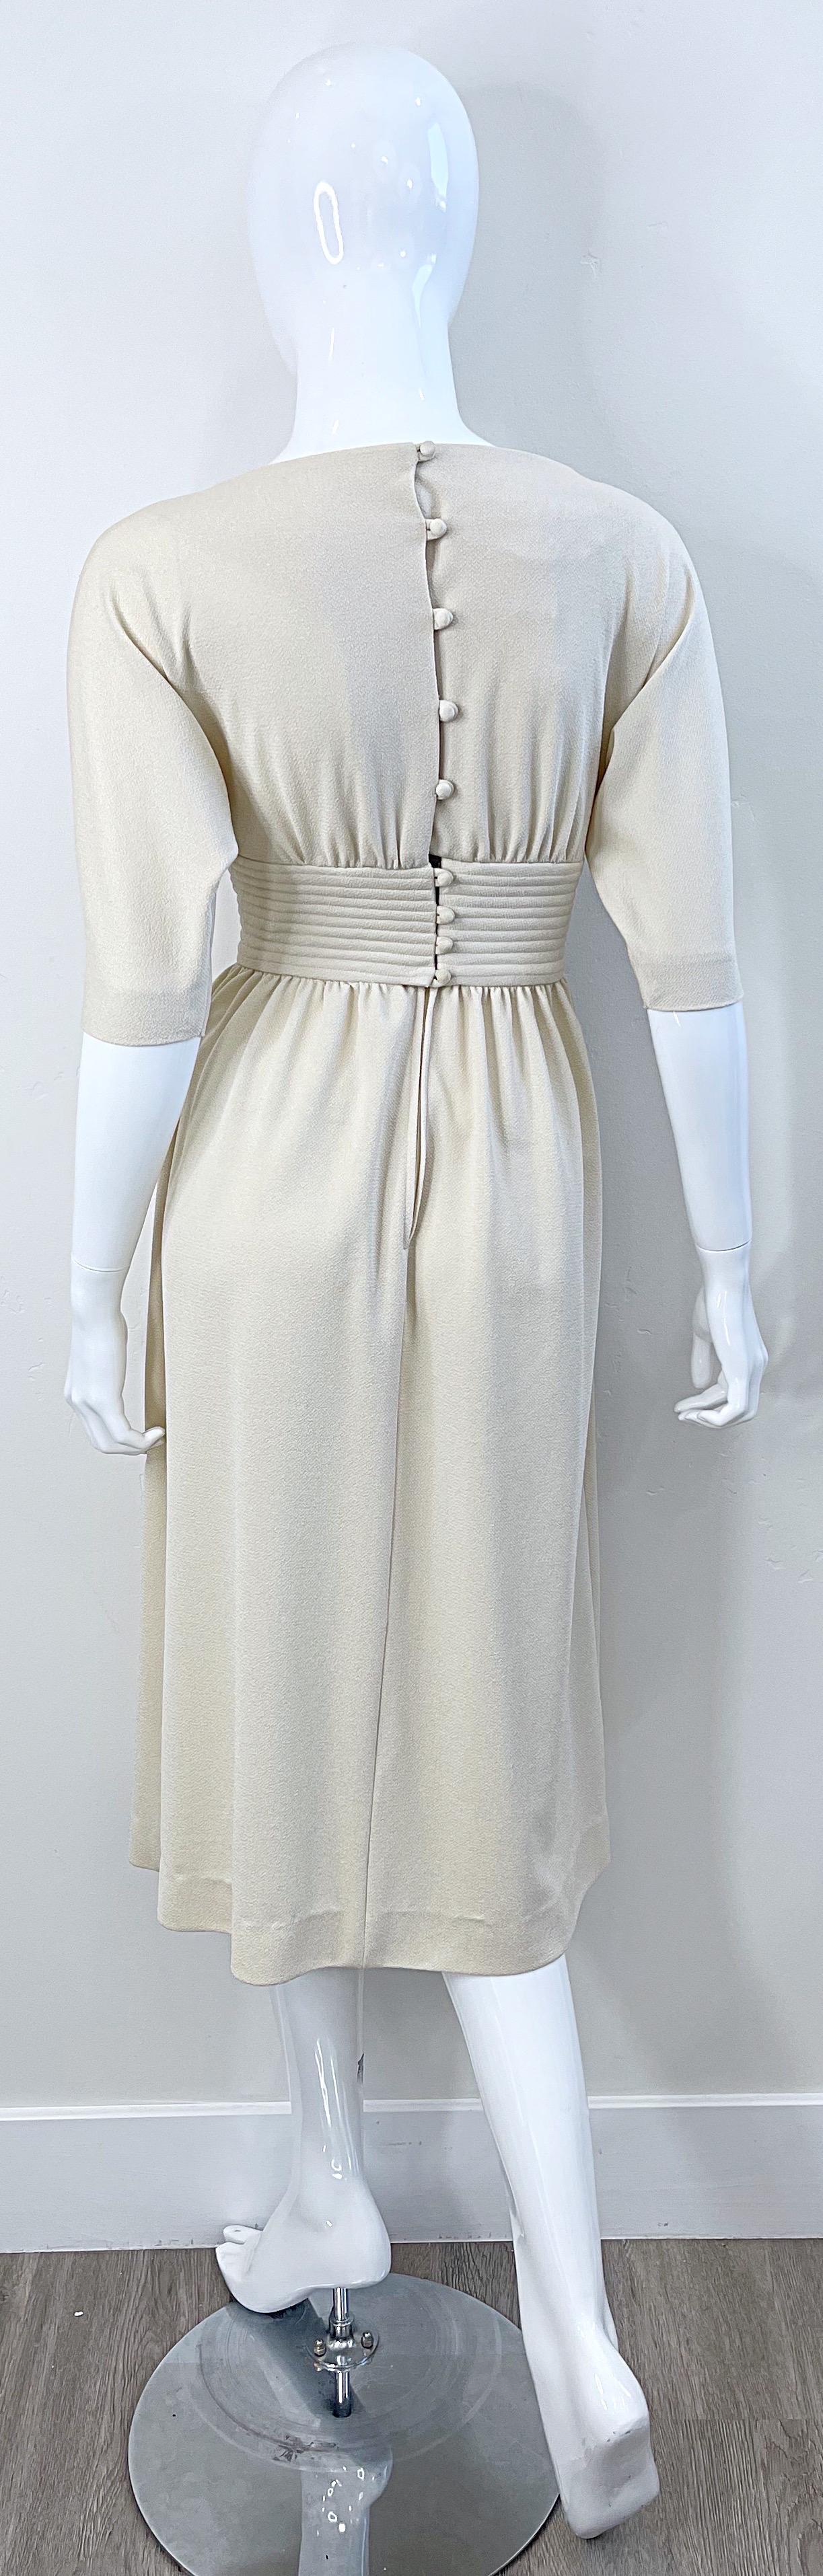 Women's 1970s Donald Brooks Size 0 Ivory Off - White 3/4 Sleeves Vintage 70s Crepe Dress For Sale